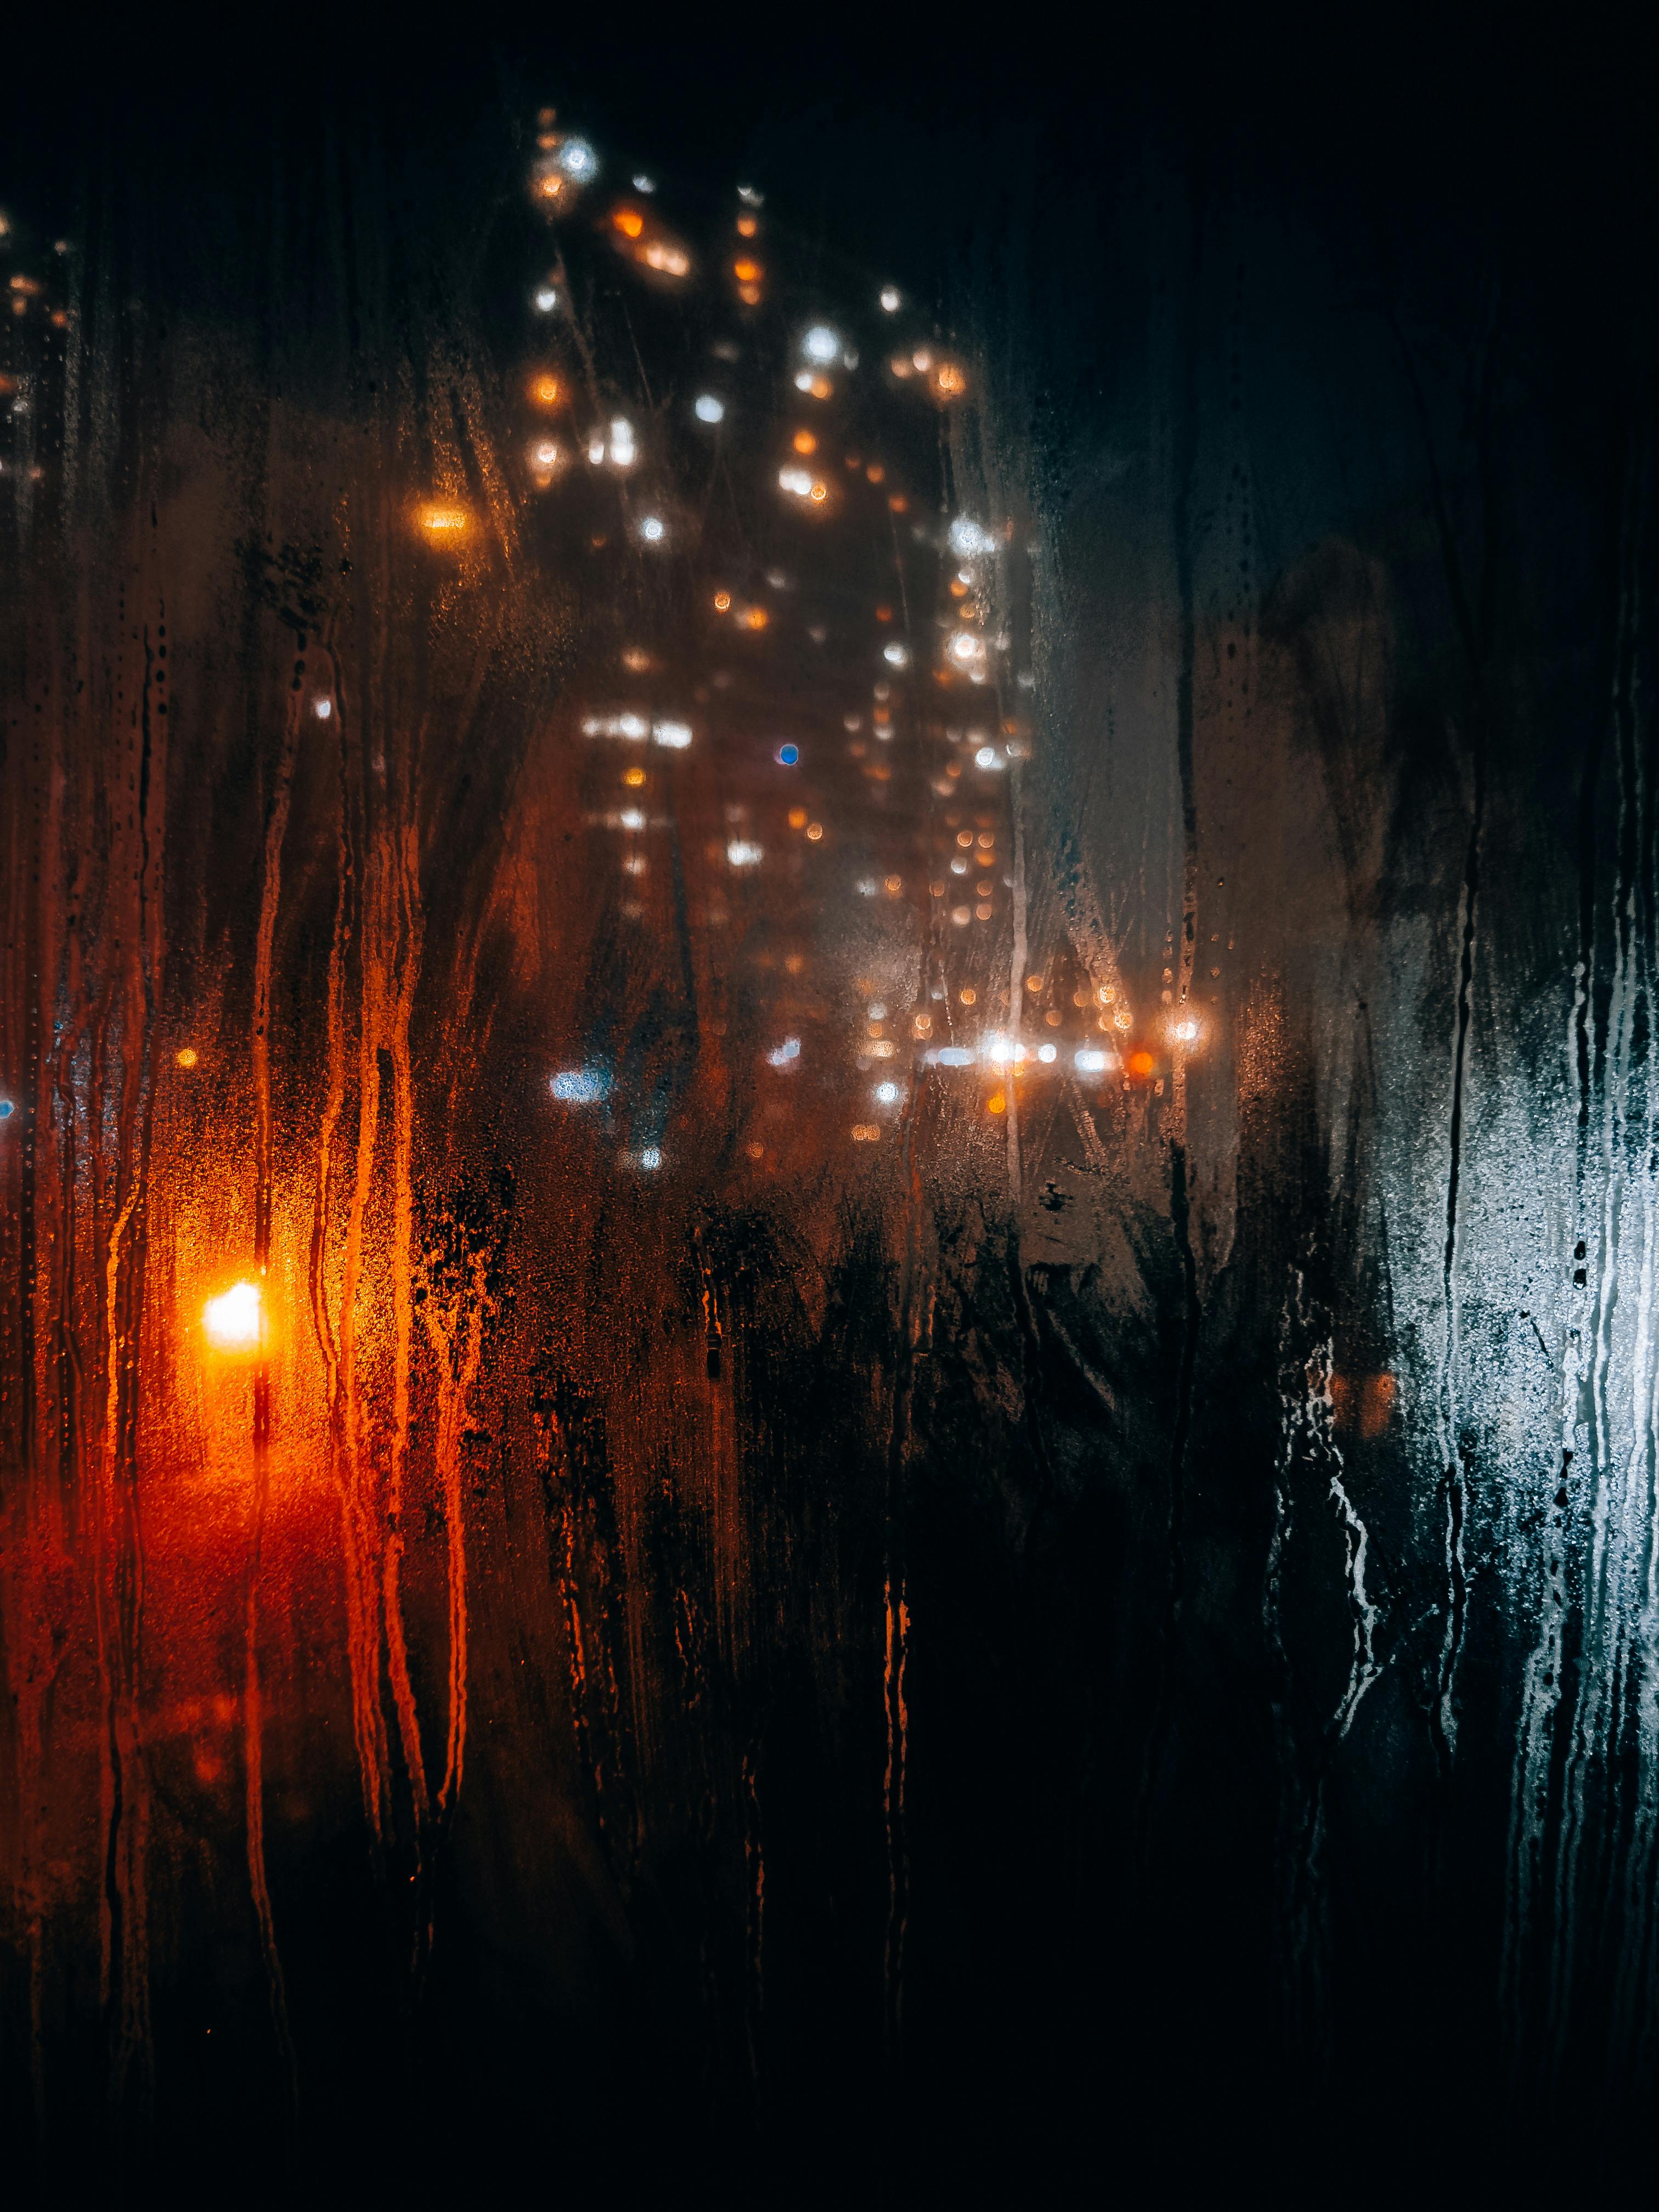 Download A vibrant display of city lights reflected in rainsoaked streets  at night Wallpaper  Wallpaperscom